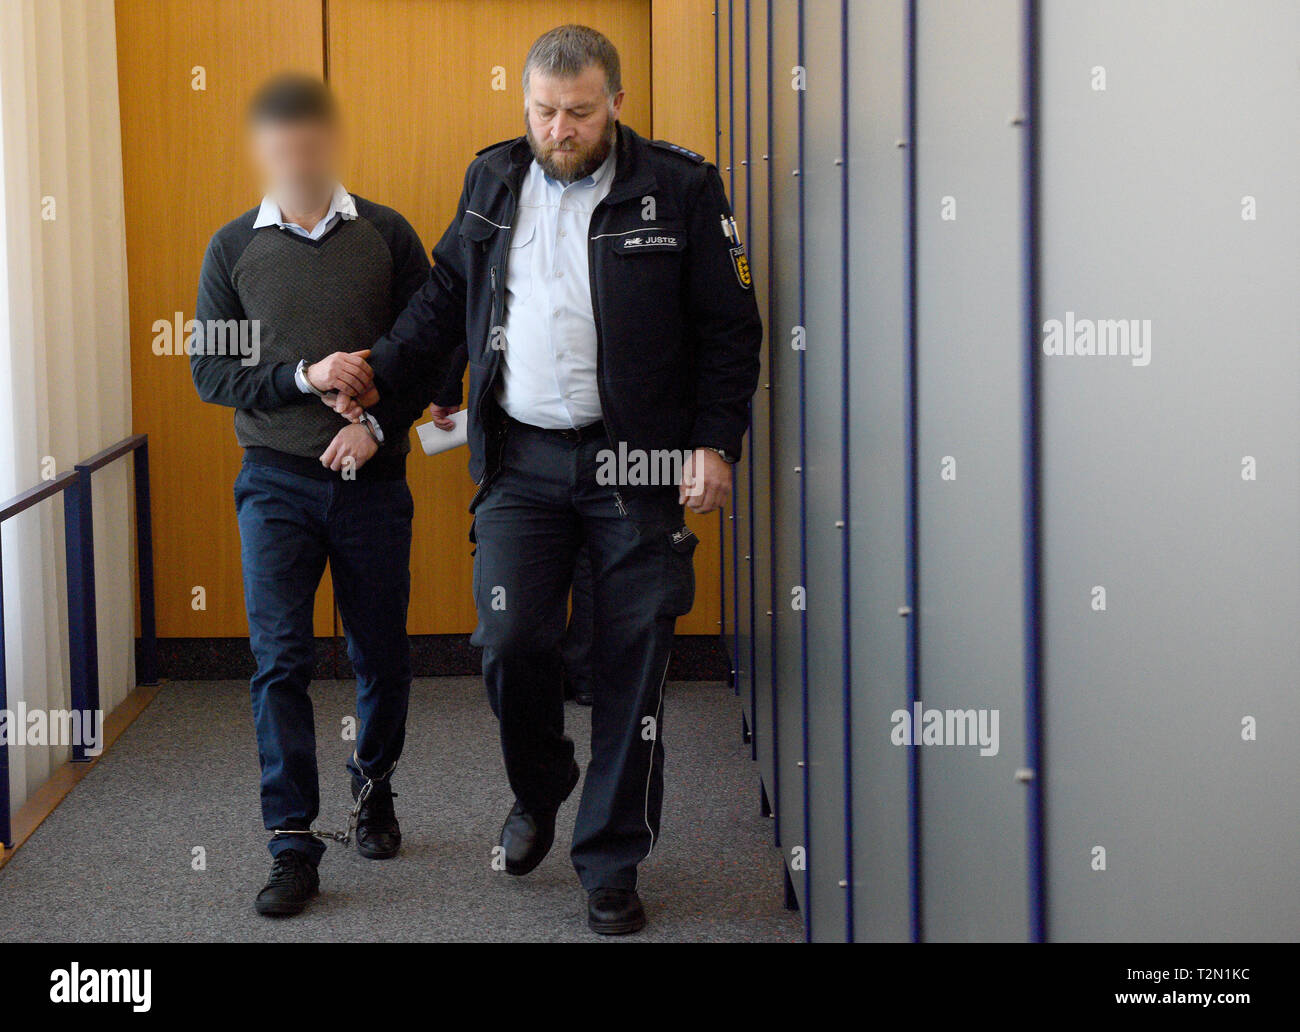 02 April 2019, Baden-Wuerttemberg, Ulm: In the district court, a judicial watchman (r) presents the accused, who is tied to his hands and feet. About two years after the murder of a young Albanian in Germany, the Ulm Regional Court announced the verdict. The accused, who is also of Albanian origin, is said to have played a central role in the murder of the victim, according to the public prosecutor's office. The motive was an archaic 'blood revenge' in the course of a feud between hostile families in Albania. The court sentenced the accused to life imprisonment for murder. Photo: Stefan Puchne Stock Photo